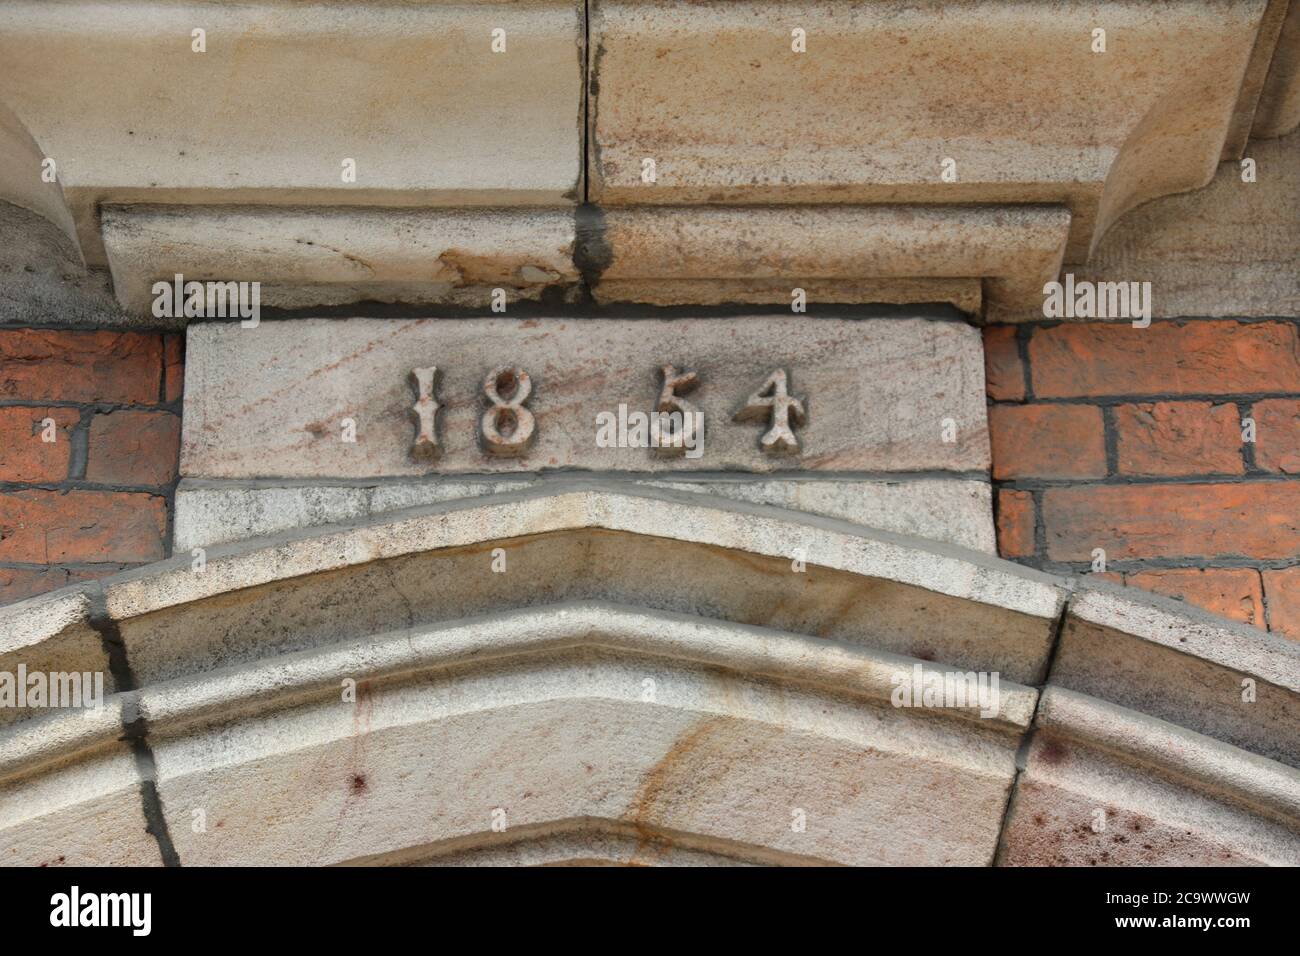 Datestone on the Trustee Savings Bank building in the Cheshire town of Sandbach Stock Photo